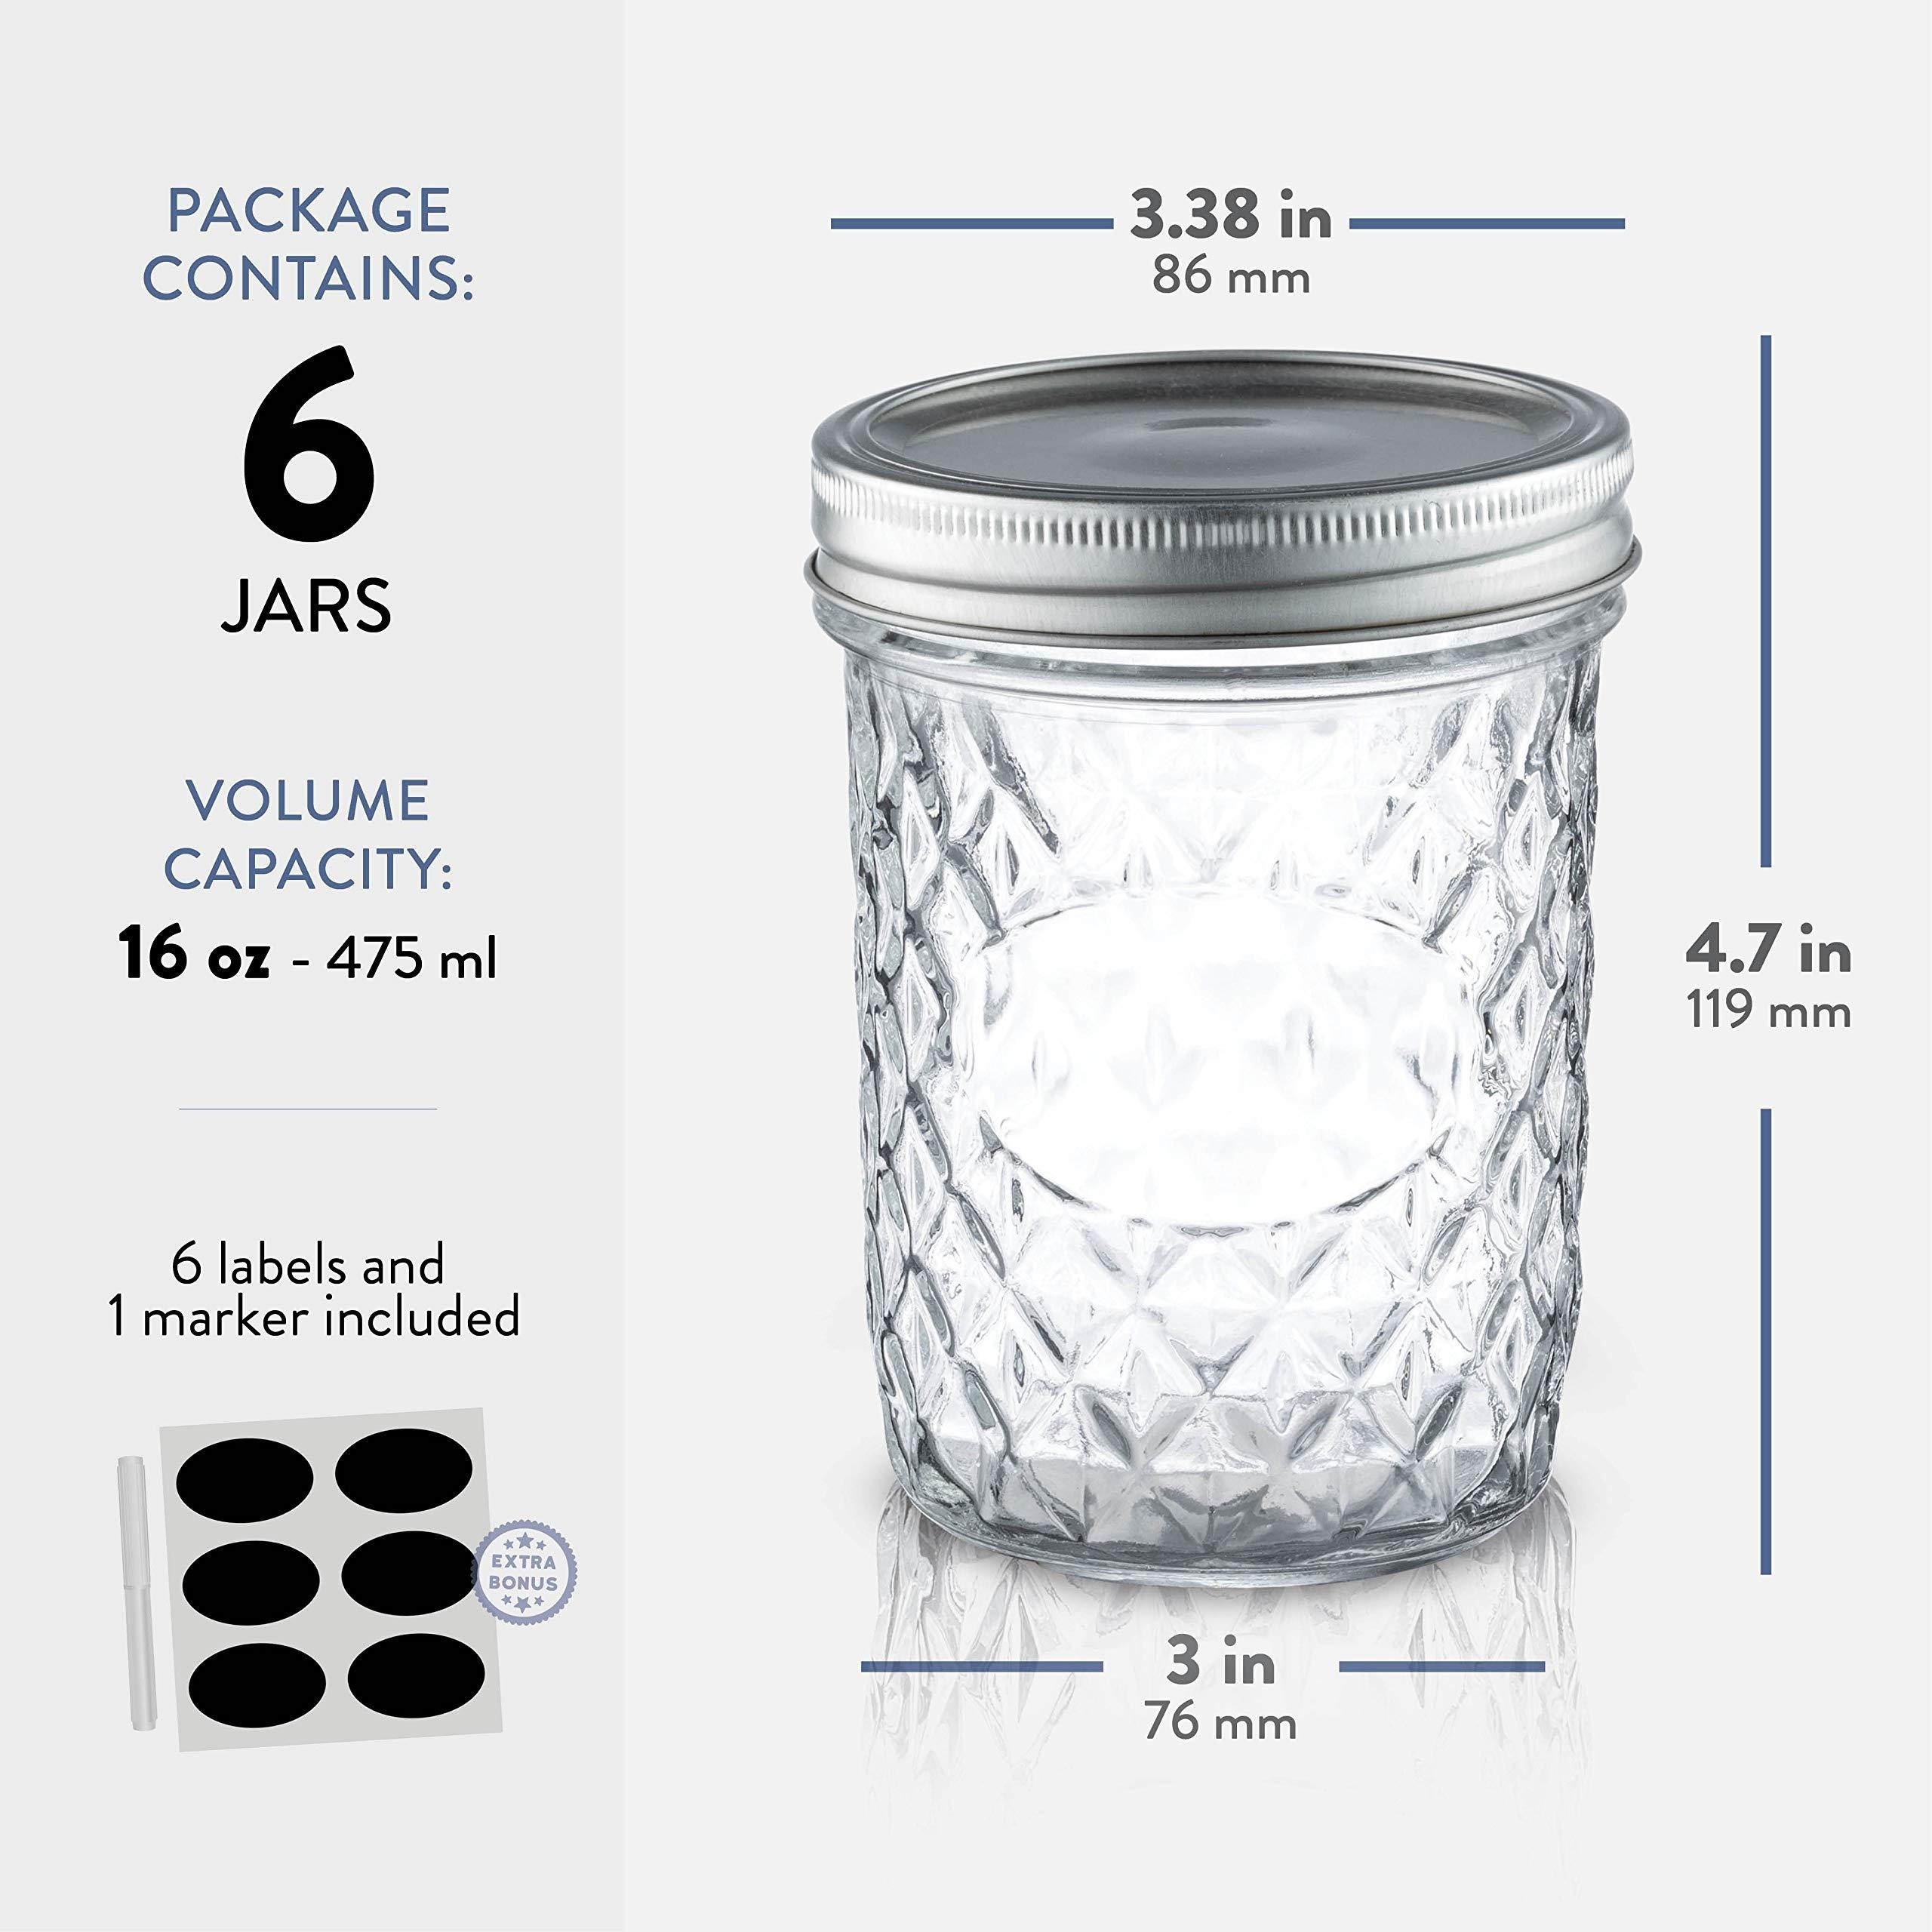 Quality Glass Mason Jars 16 Ounce (6 Pack) Regular Mouth Glass Mason Jar  with Lids & Bands, Dishwasher Safe. Ideal for Canning, Pickling, Jam, Meal